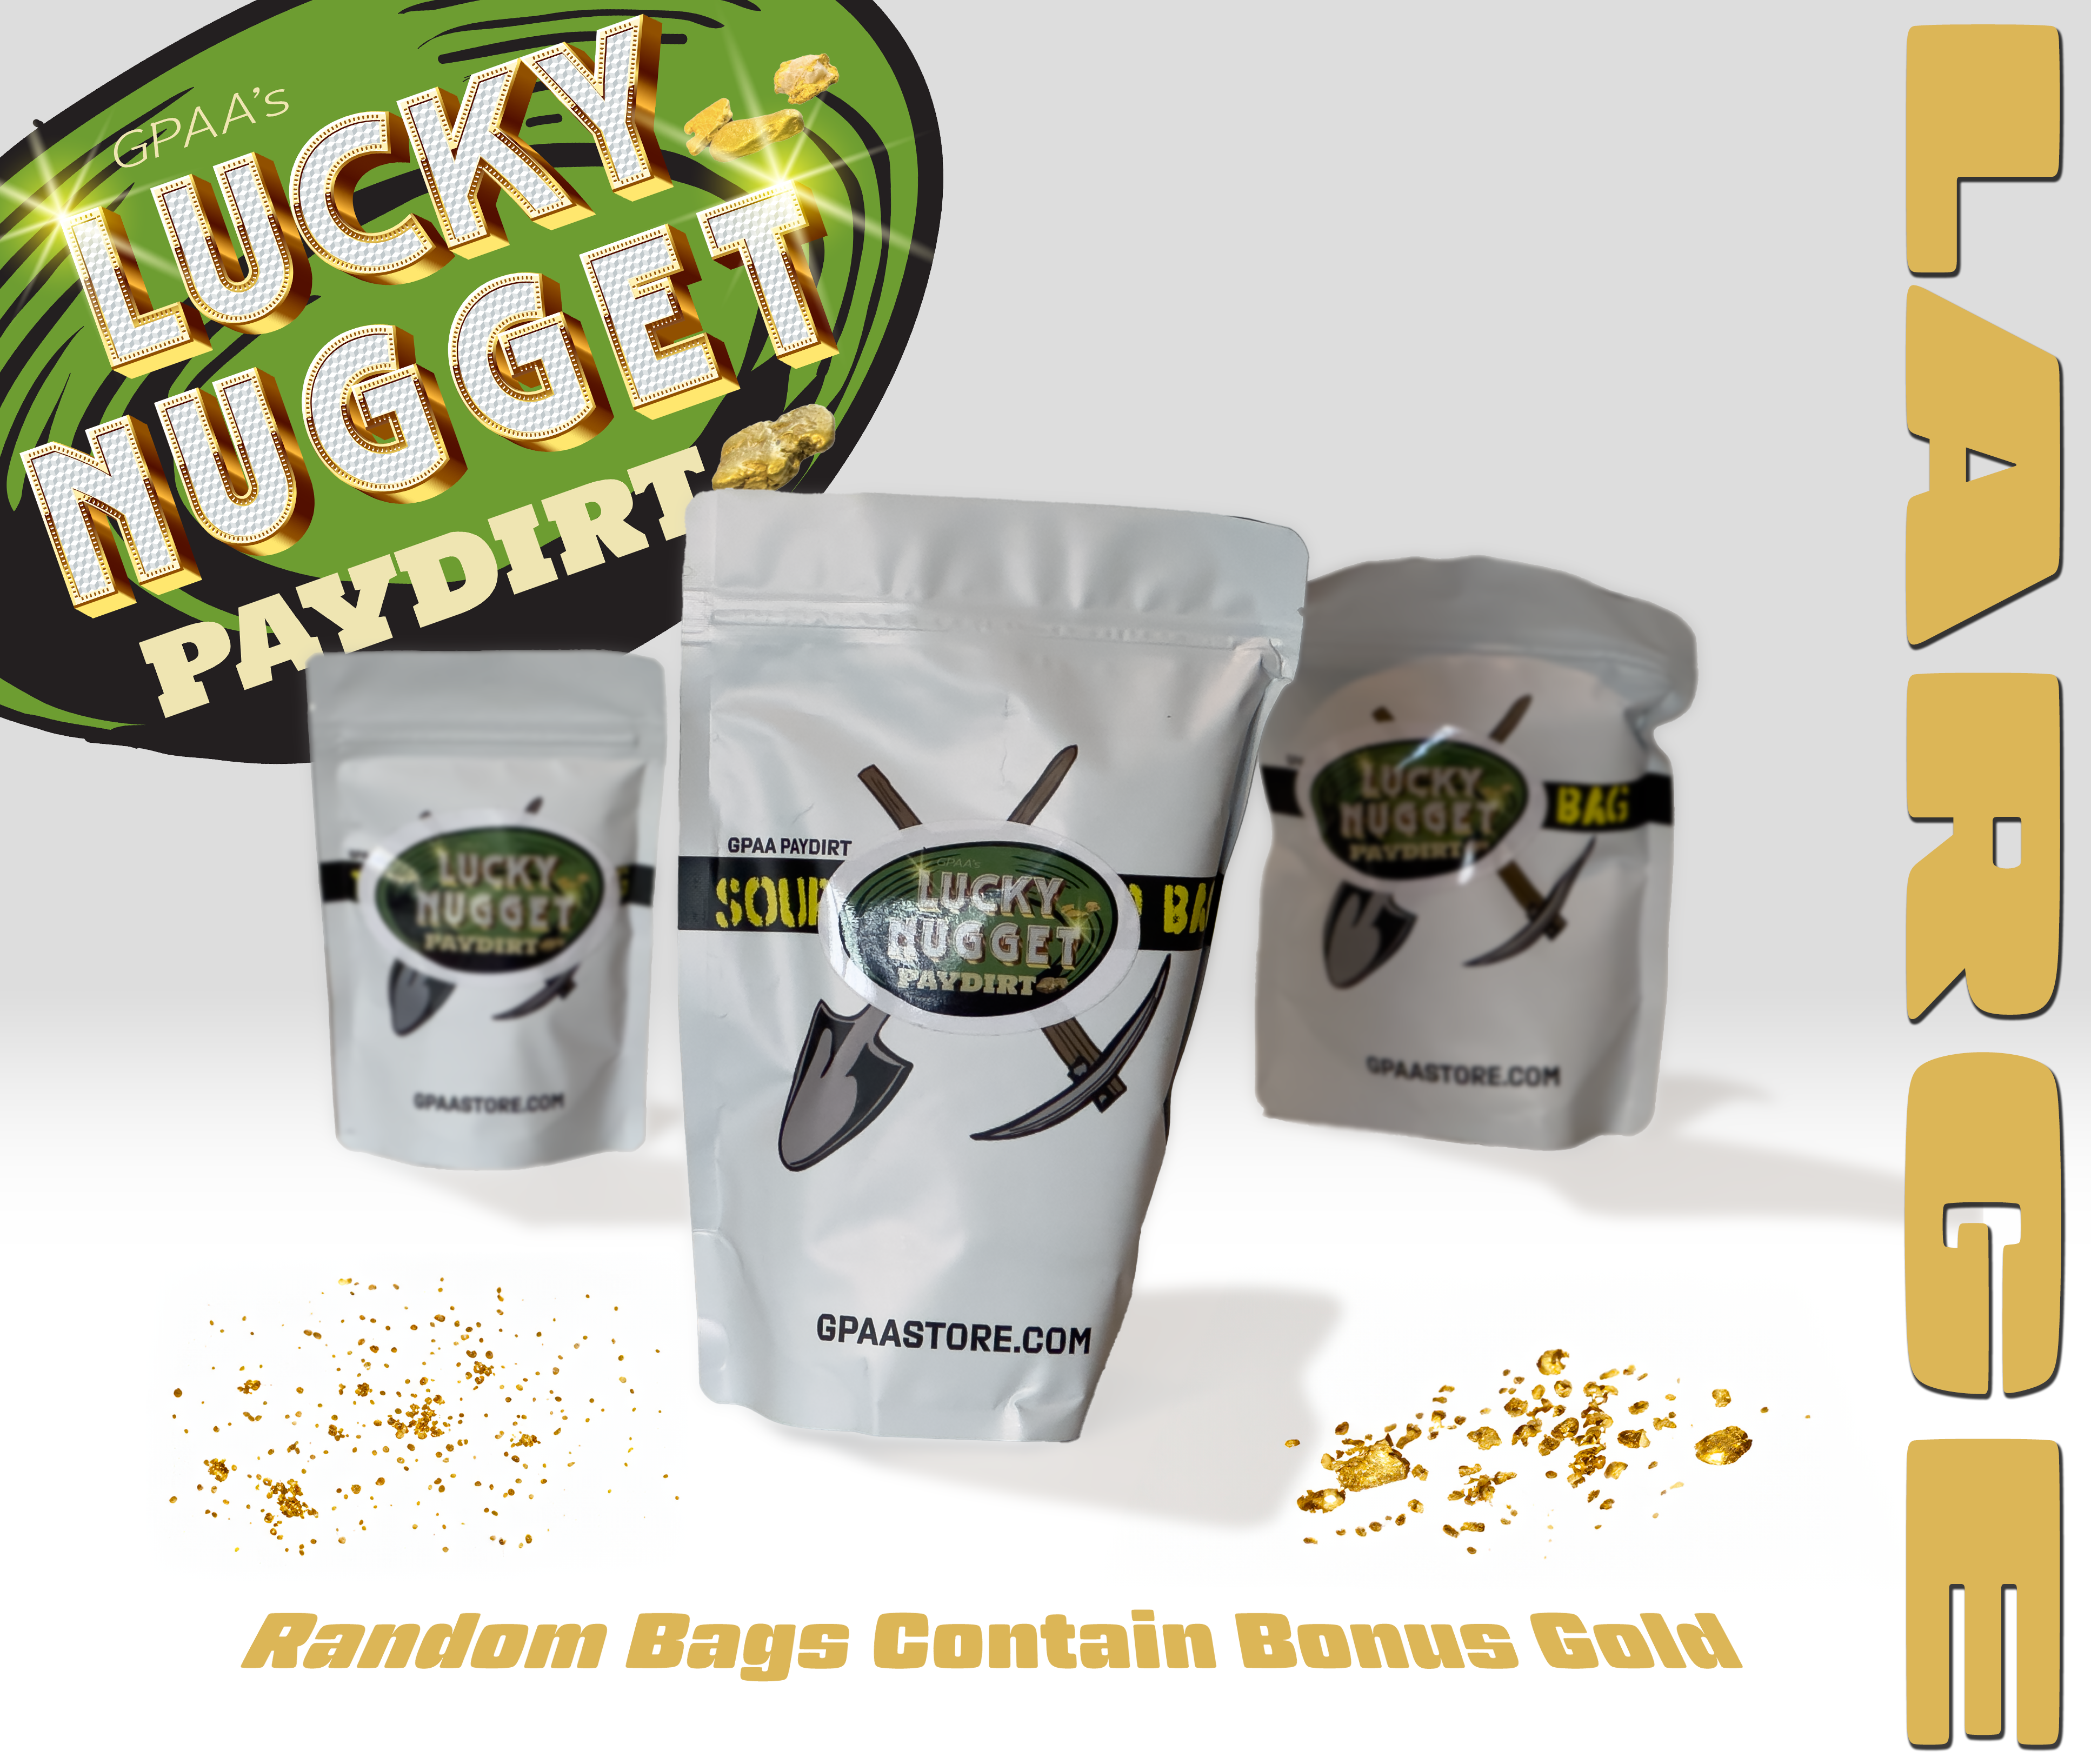 $10 Bag of Pay Dirt- with REAL GOLD